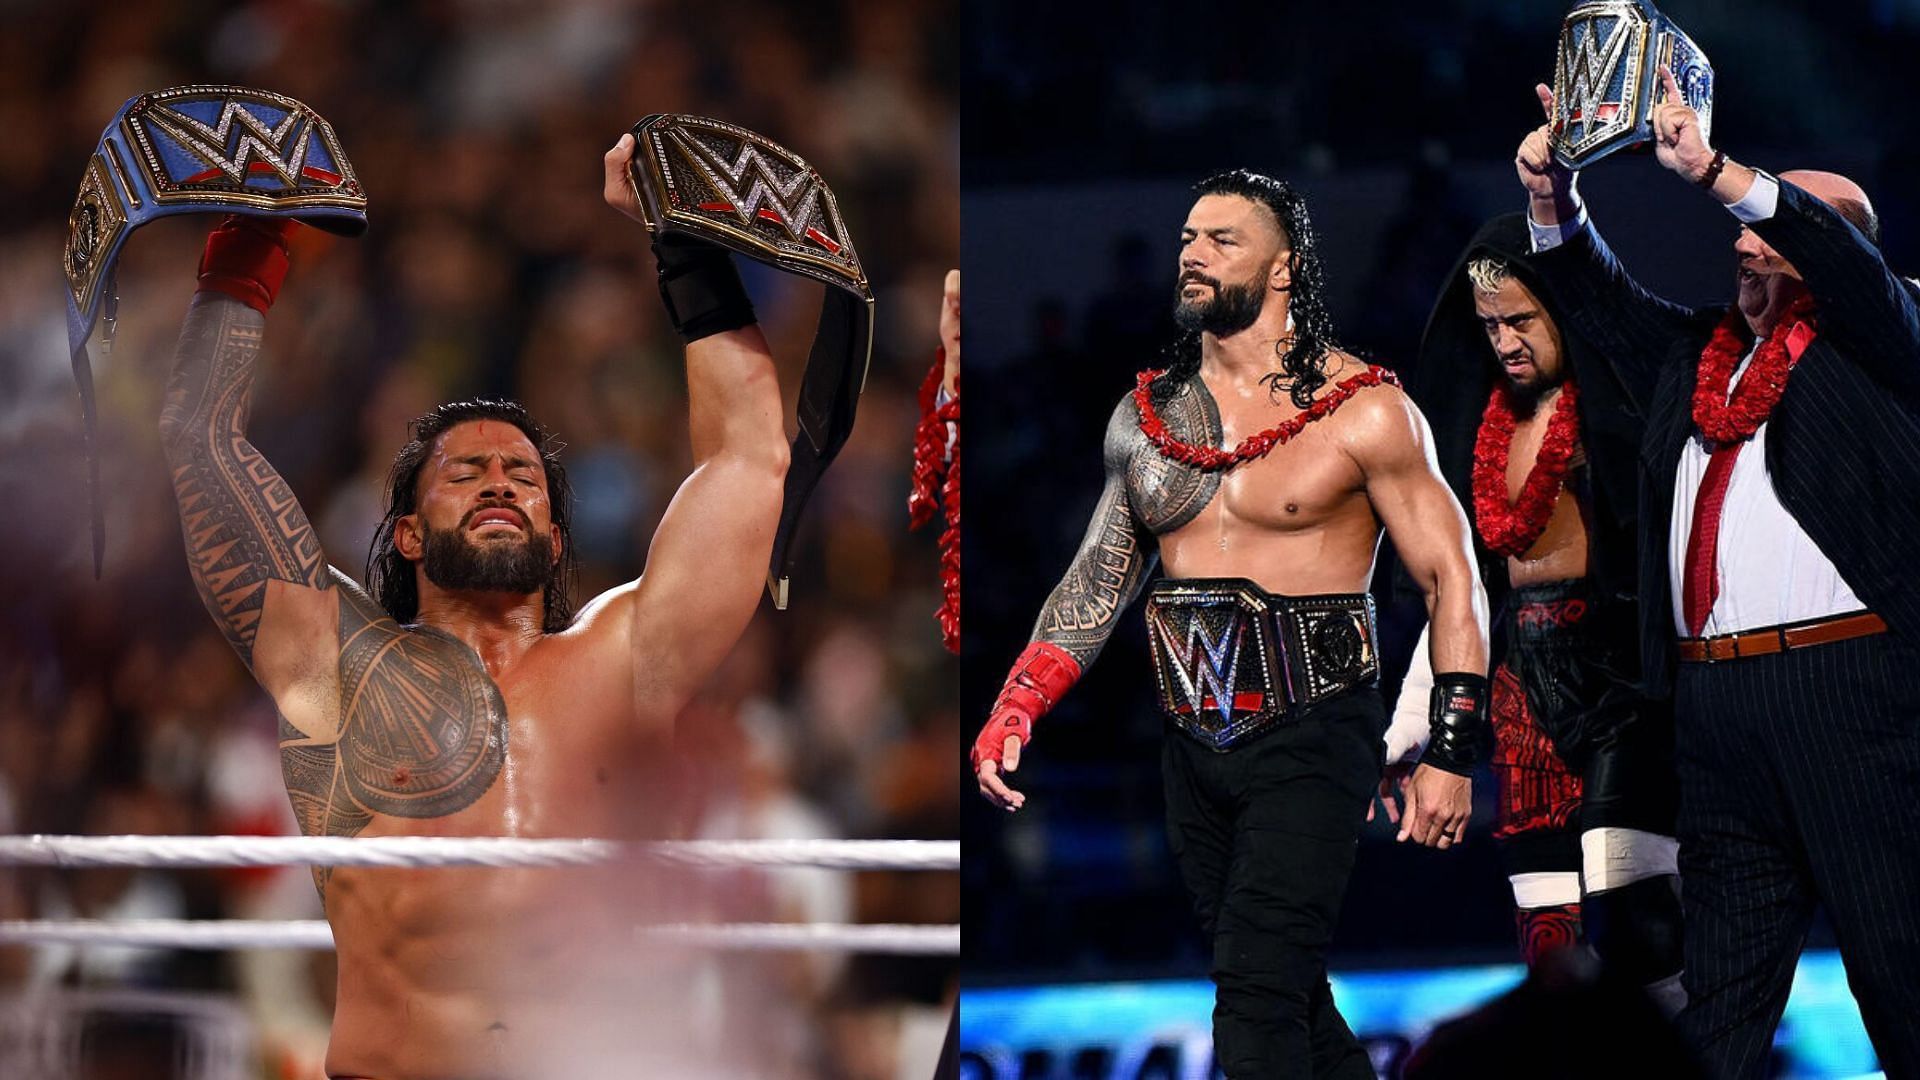 Roman Reigns was victorious at WrestleMania 39